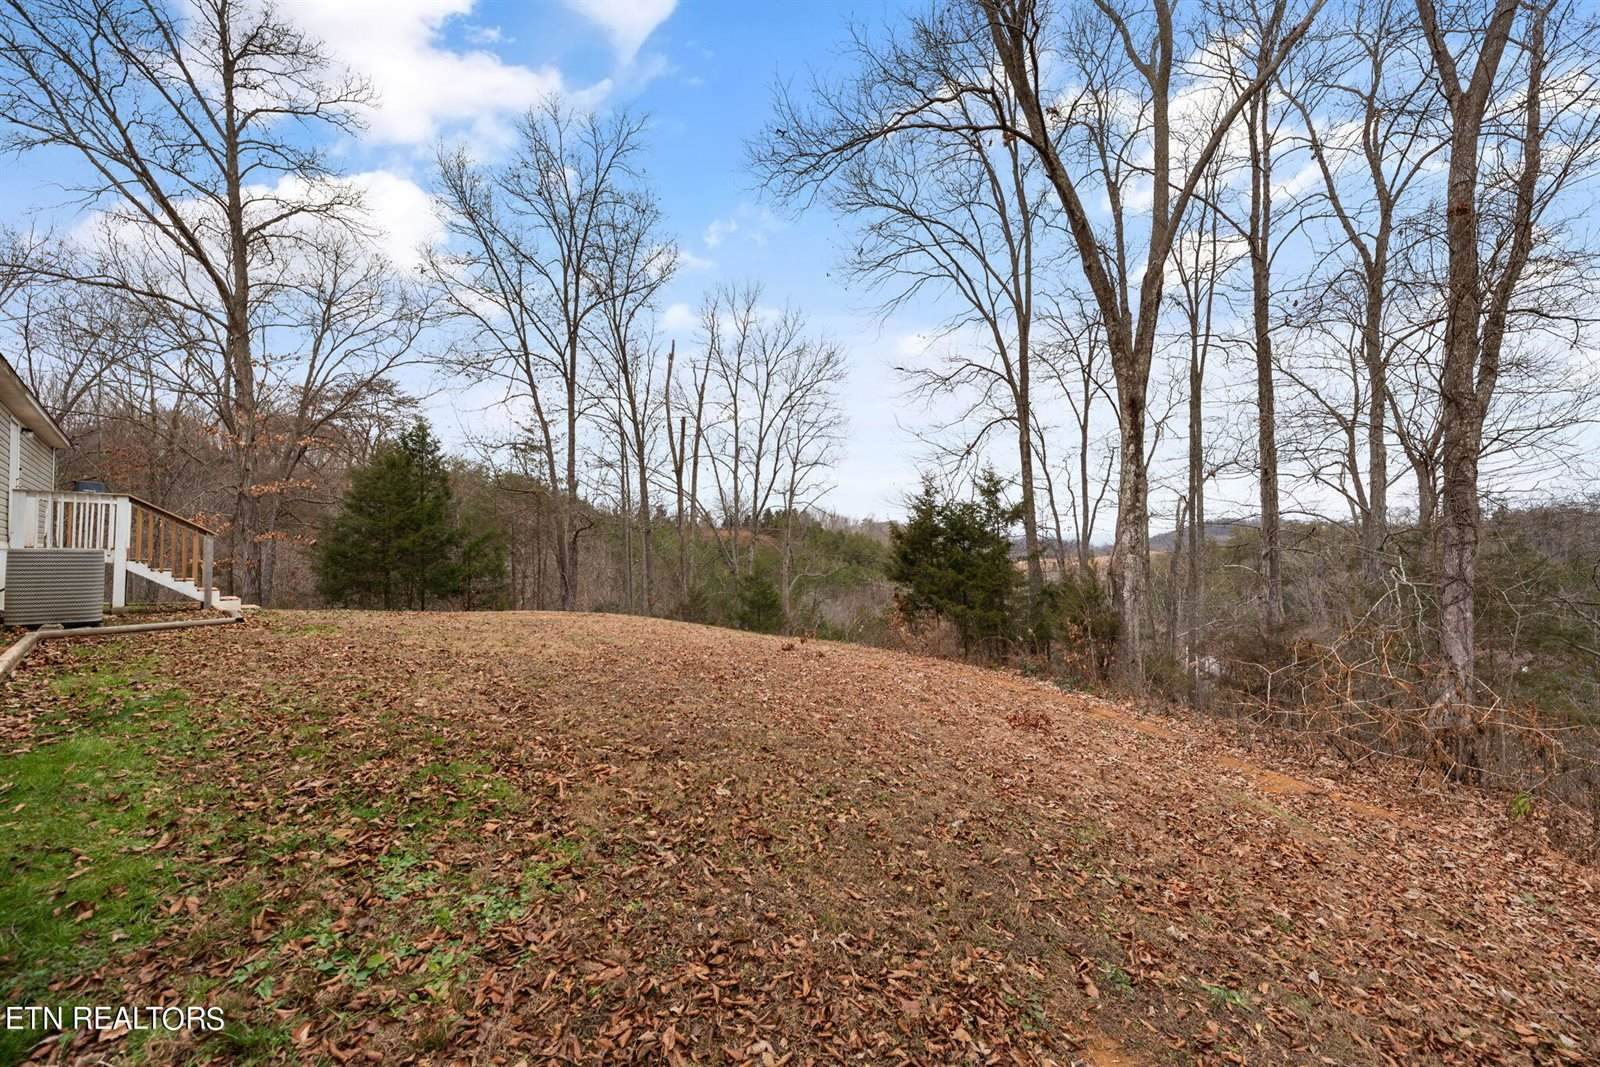 7448 East Highway 25E, Thorn Hill, TN 37881